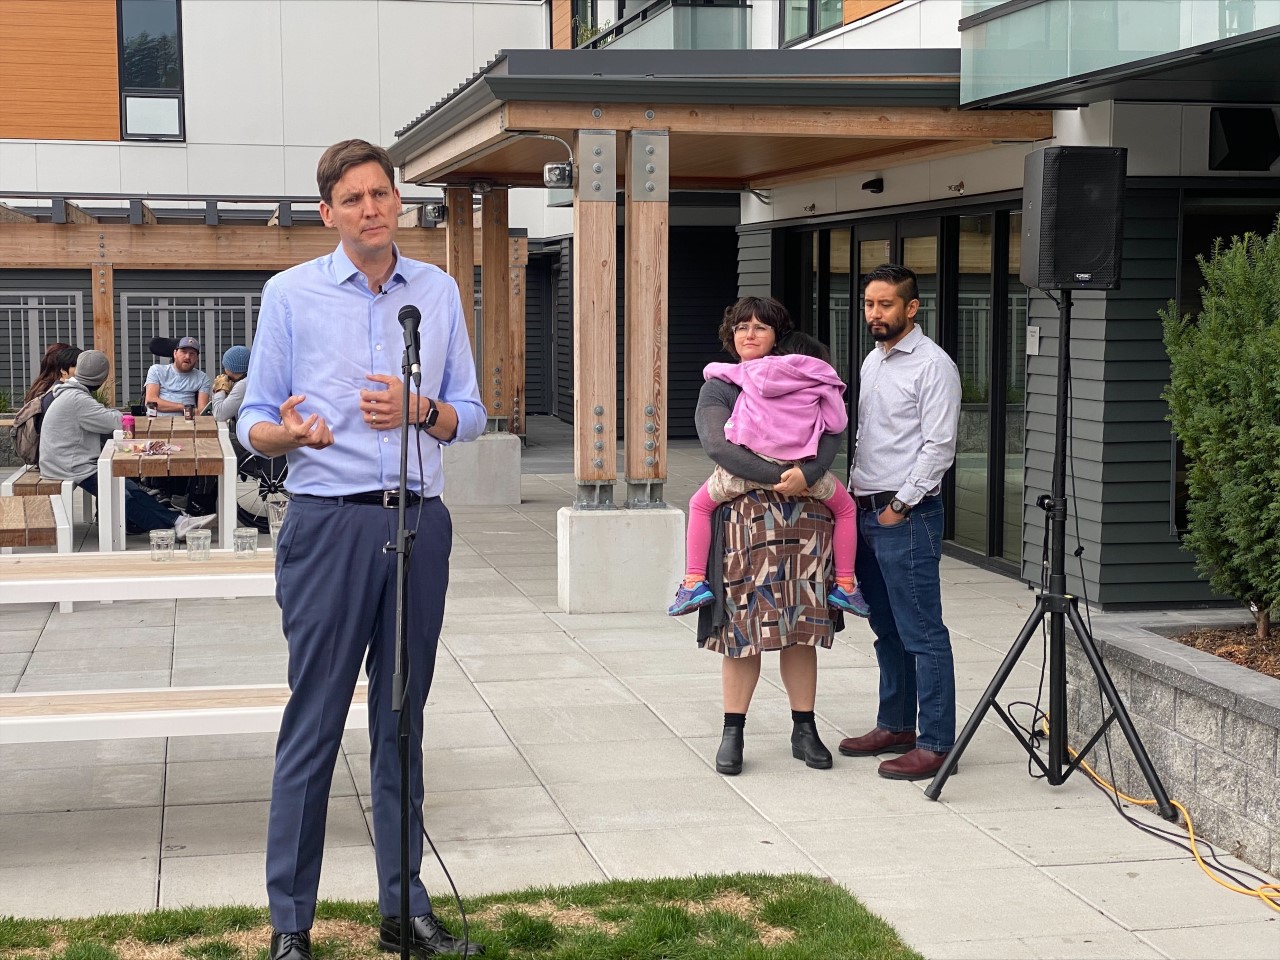 David Eby's affordable housing plan proposes flipping tax